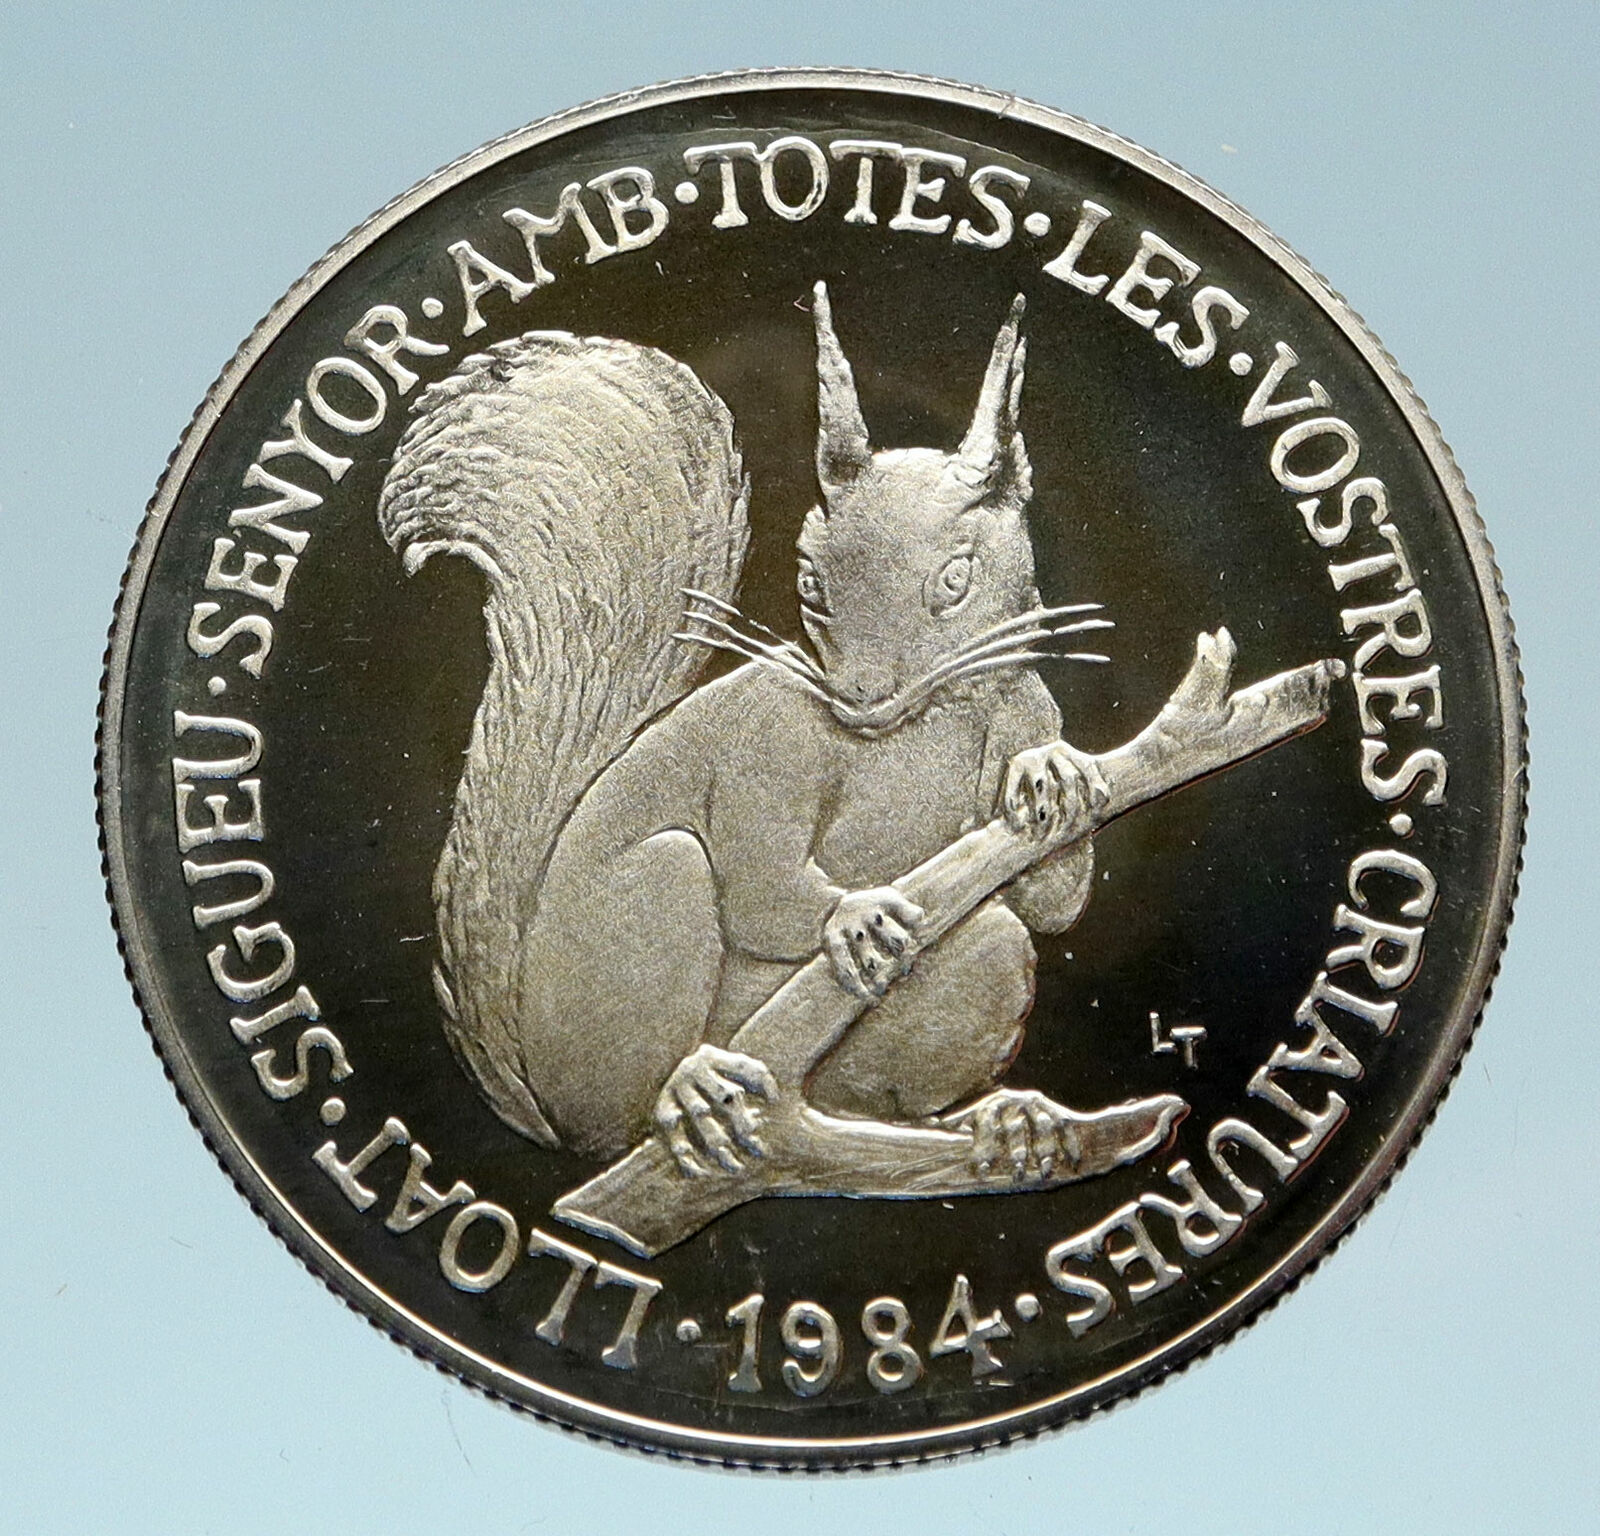 1984 ANDORRA Wildlife Red Squirrel Antique Proof Silver 20 Diners Coin i83114